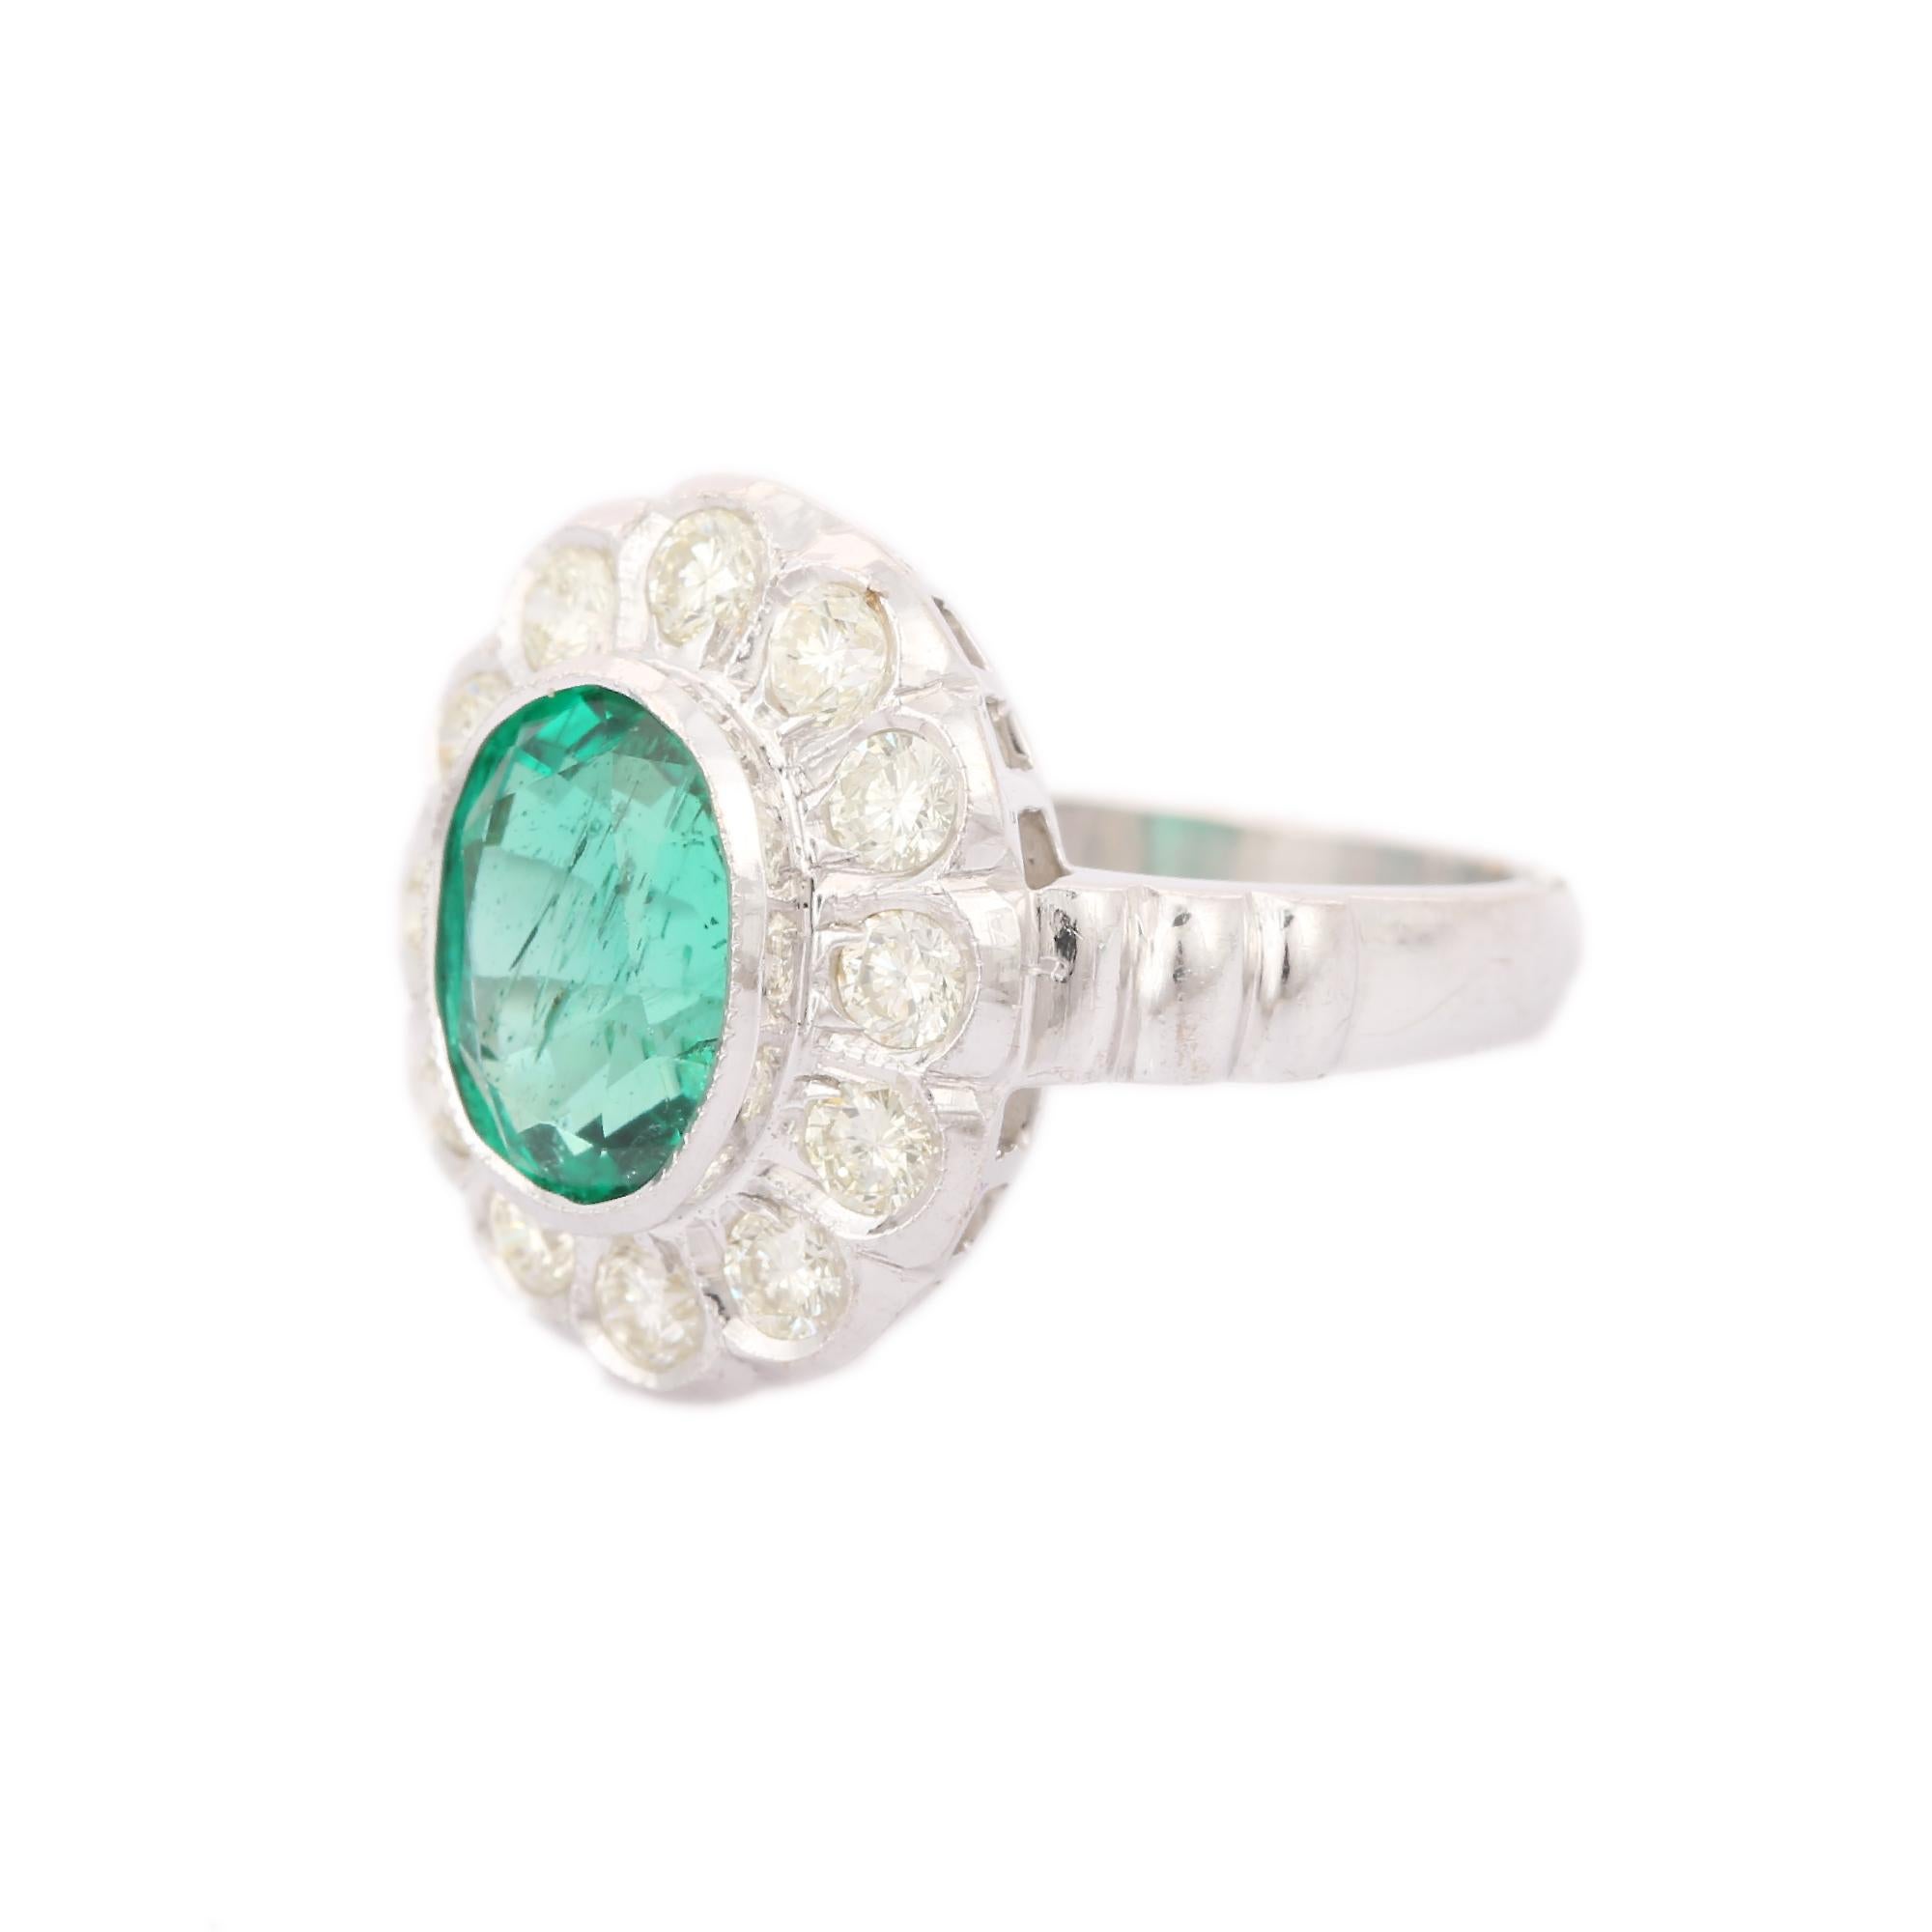 For Sale:  Exquisite 18kt Solid White Gold Emerald Flower Ring With Diamonds 5